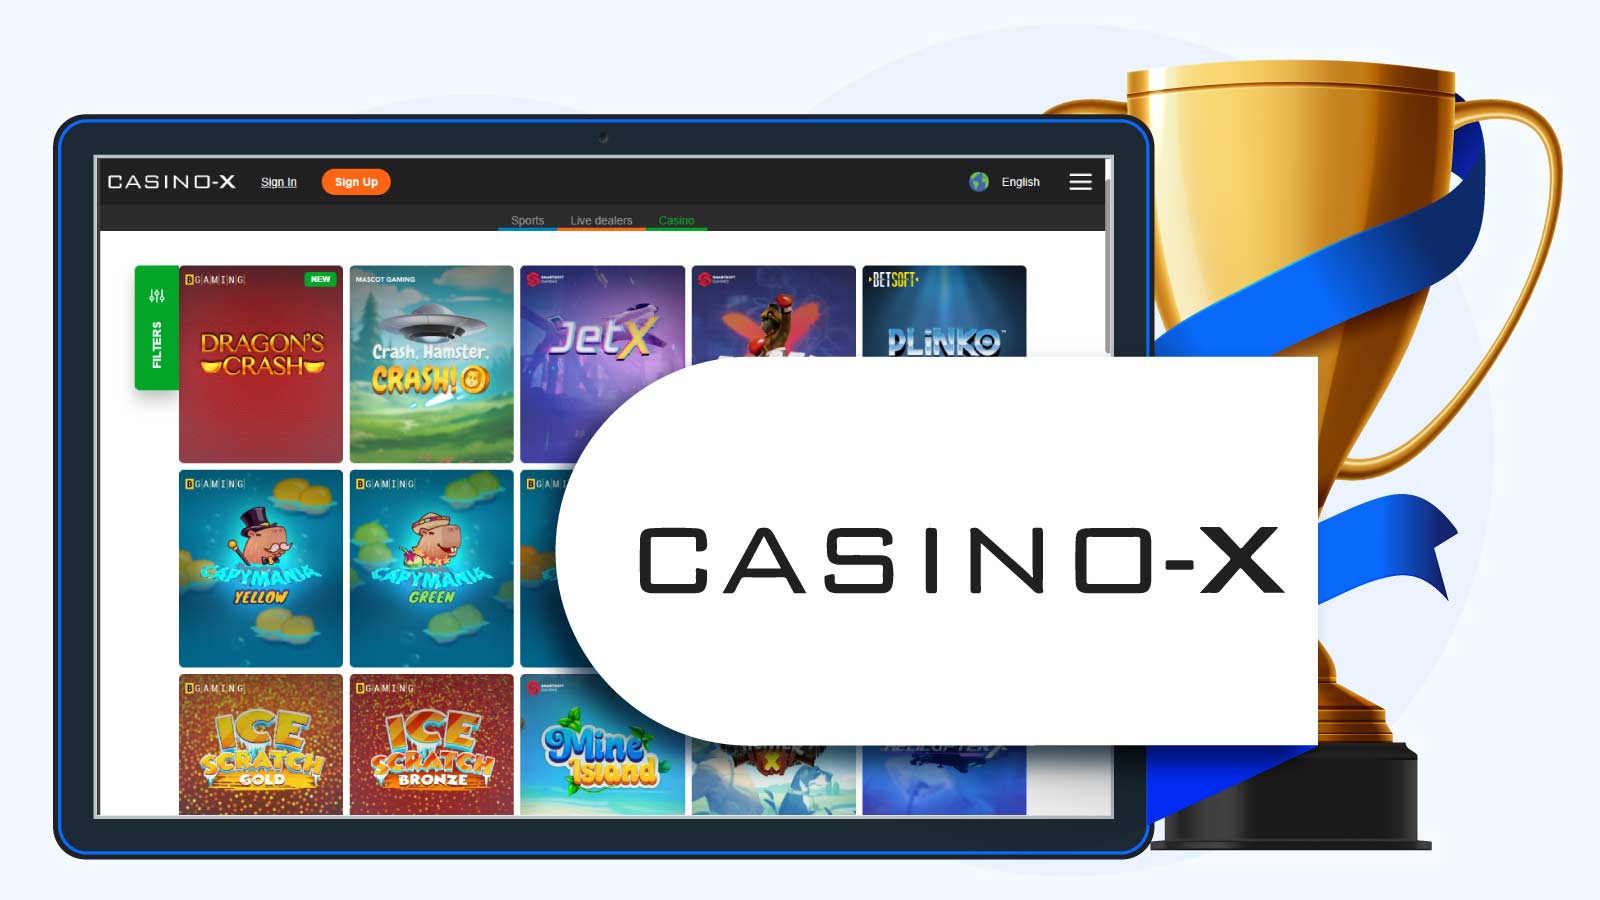 Casino-X – Best Low Wagering Casino Overall